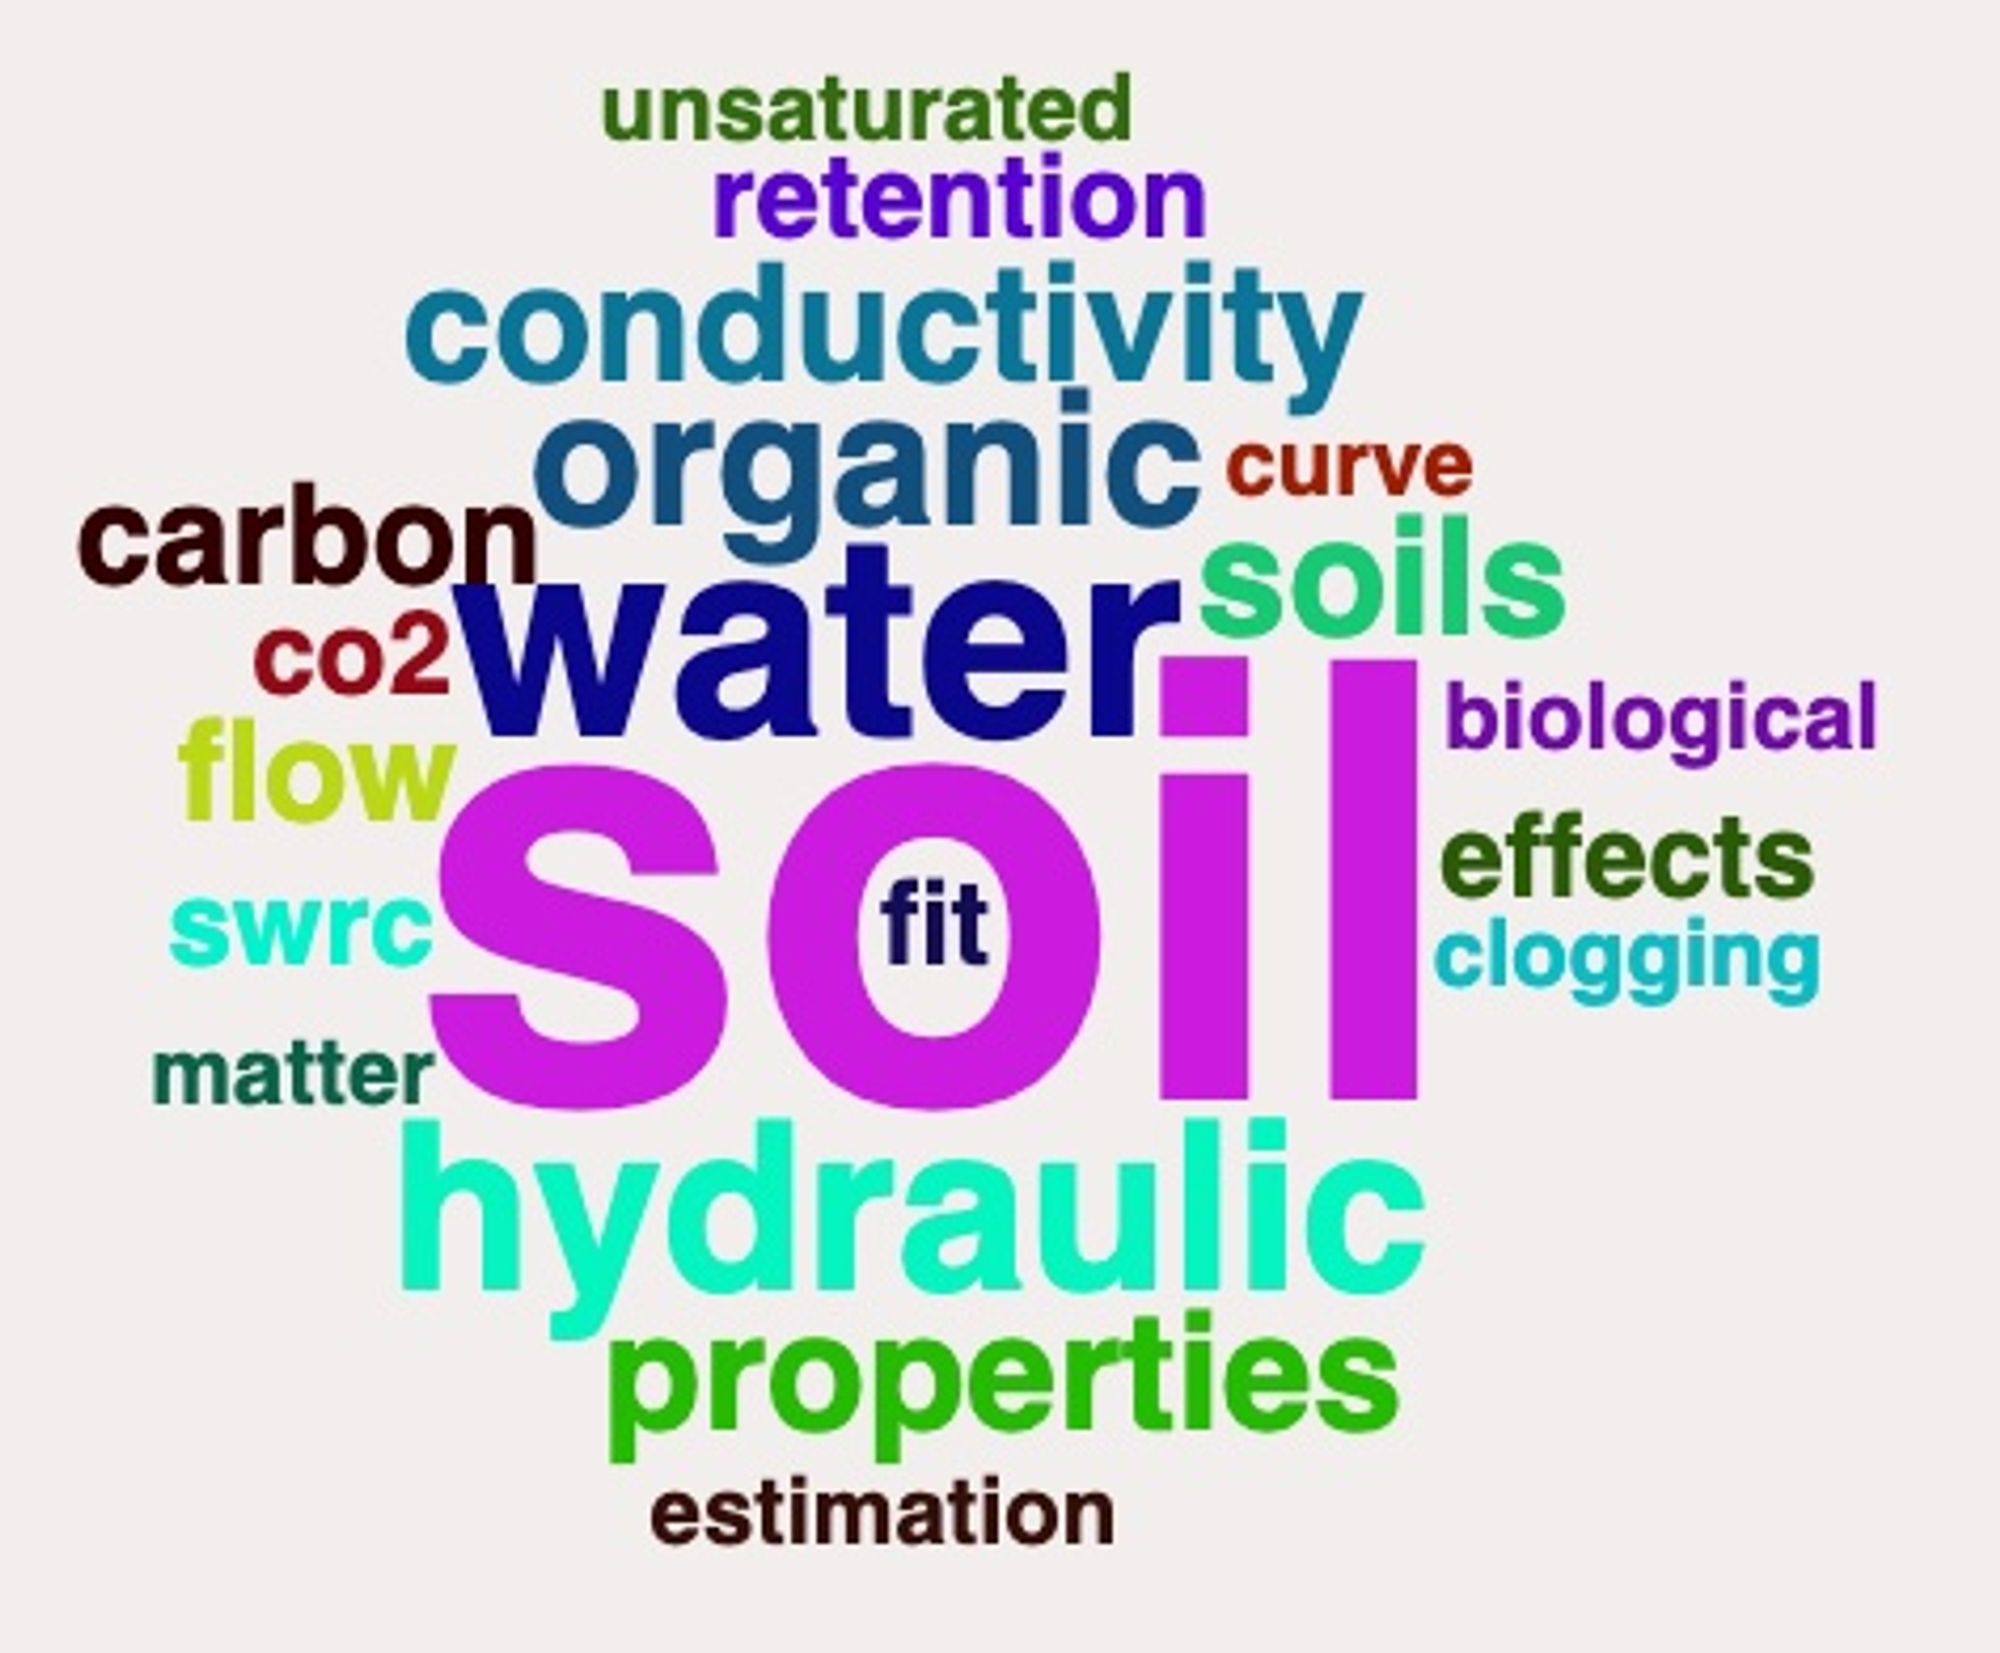 Cloud of words in various colors and sizes. Some of the largest words include soil water hydraulic organic soils conductivity properties flow carbon fit retention swrc effects co2 curve biological clogging matter estimation unsaturated